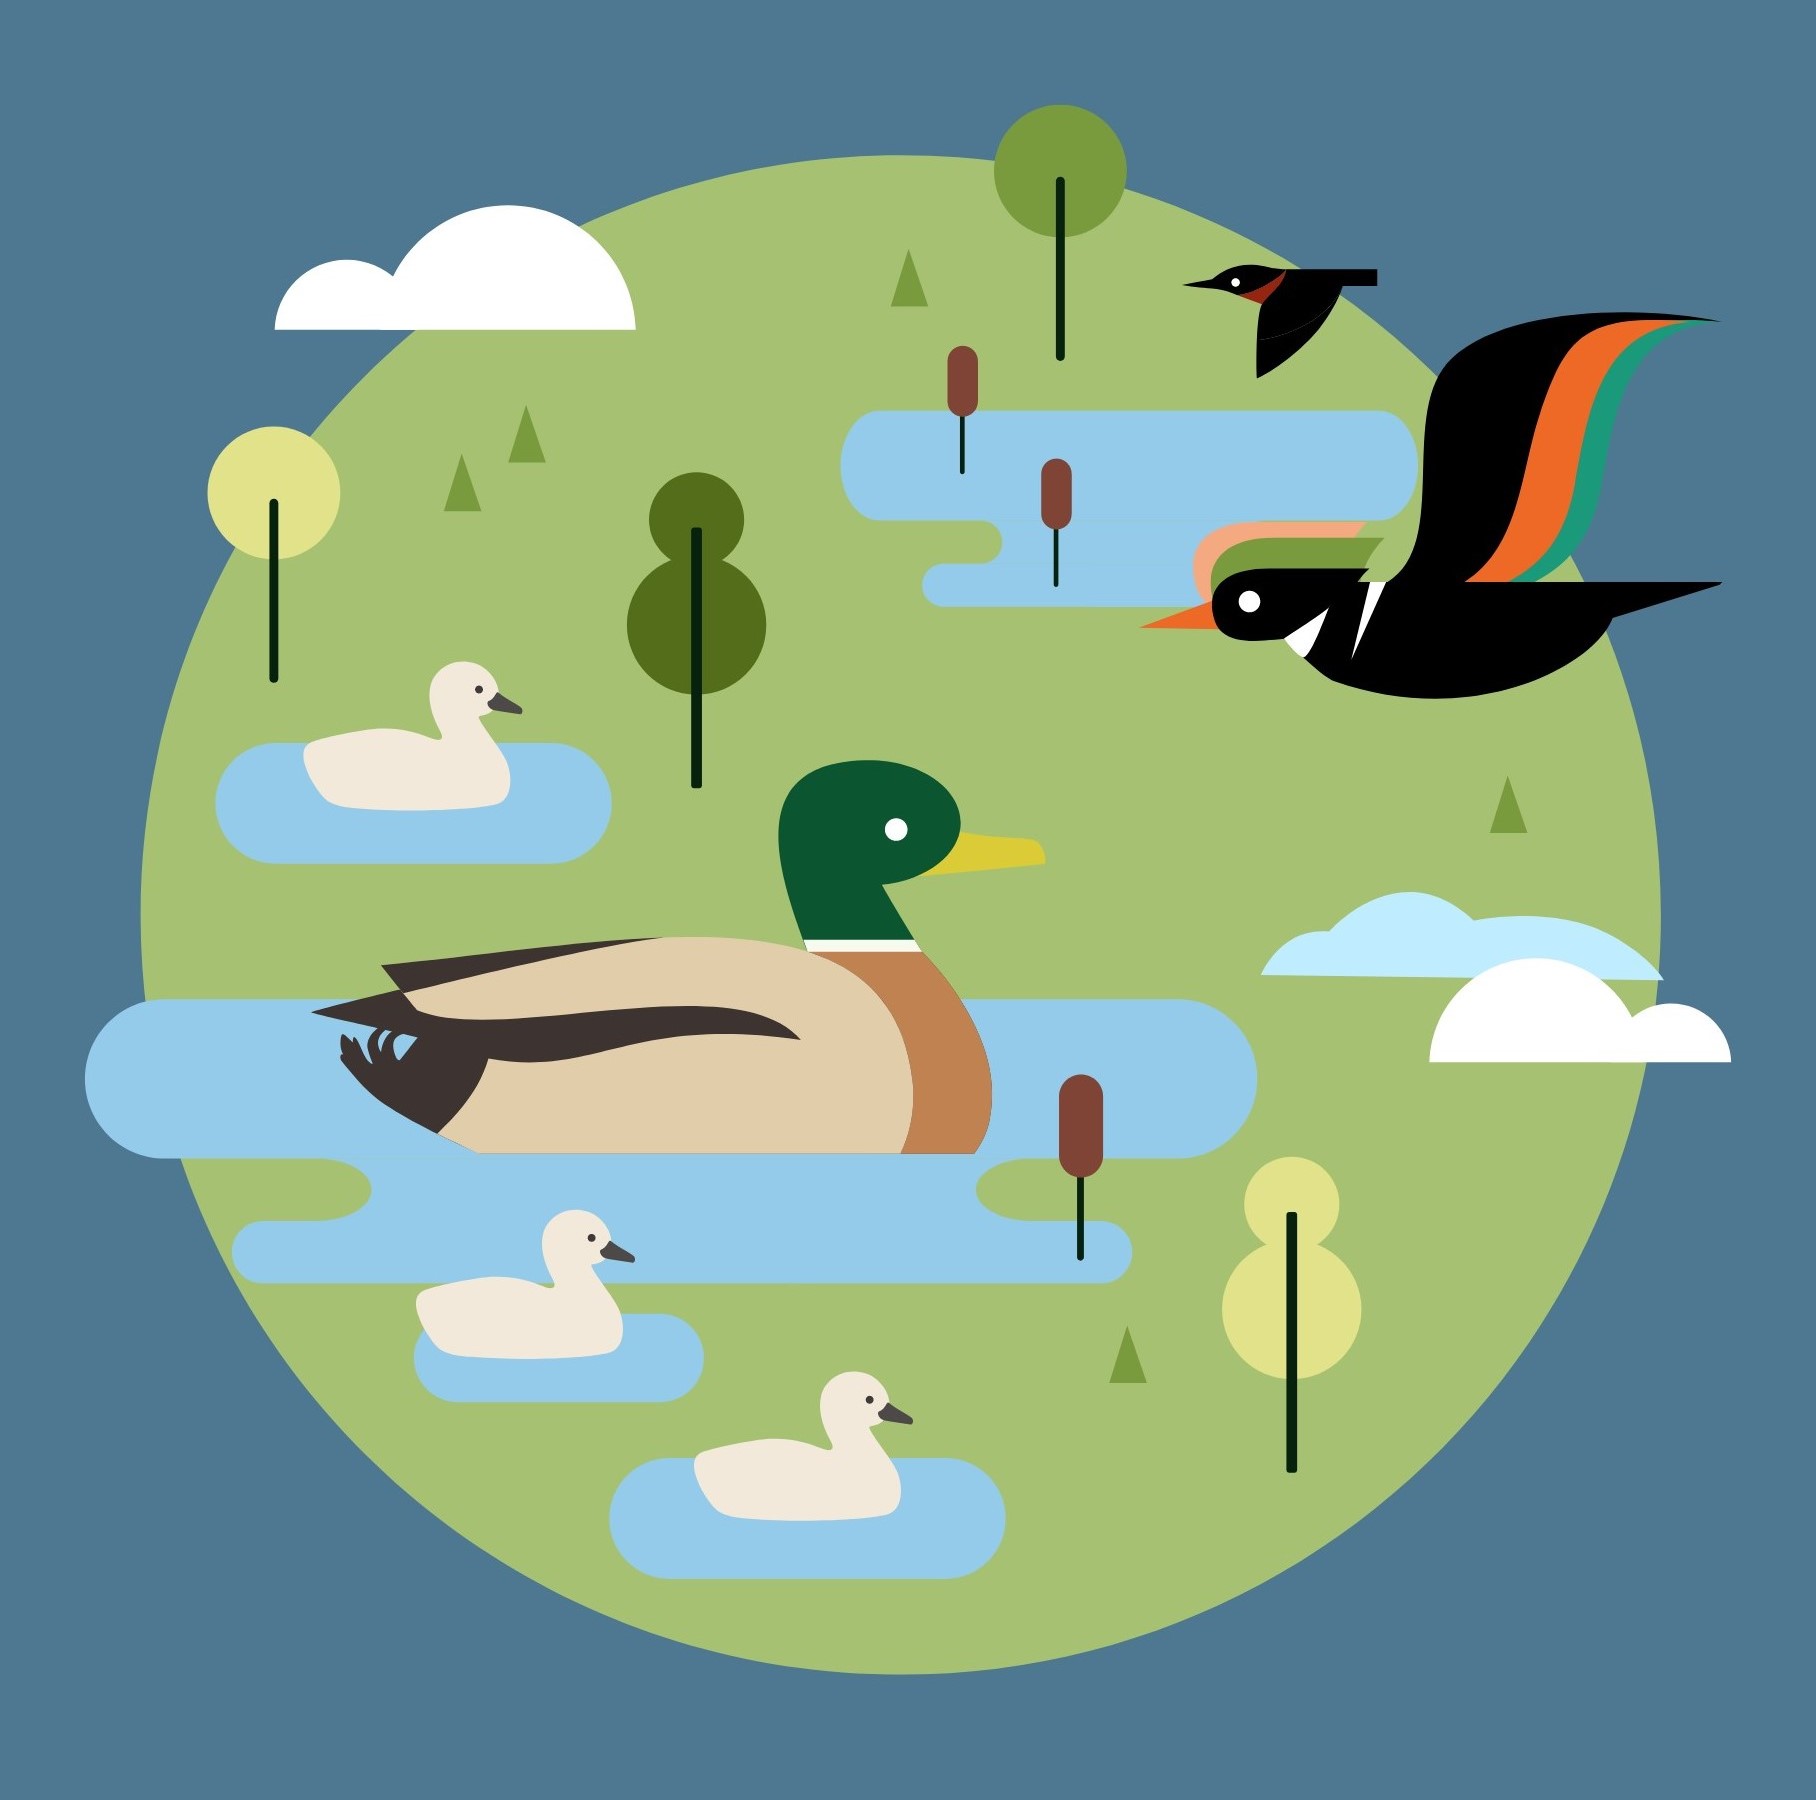 Illustration of ducks and other aquatic life in a wetland environment 